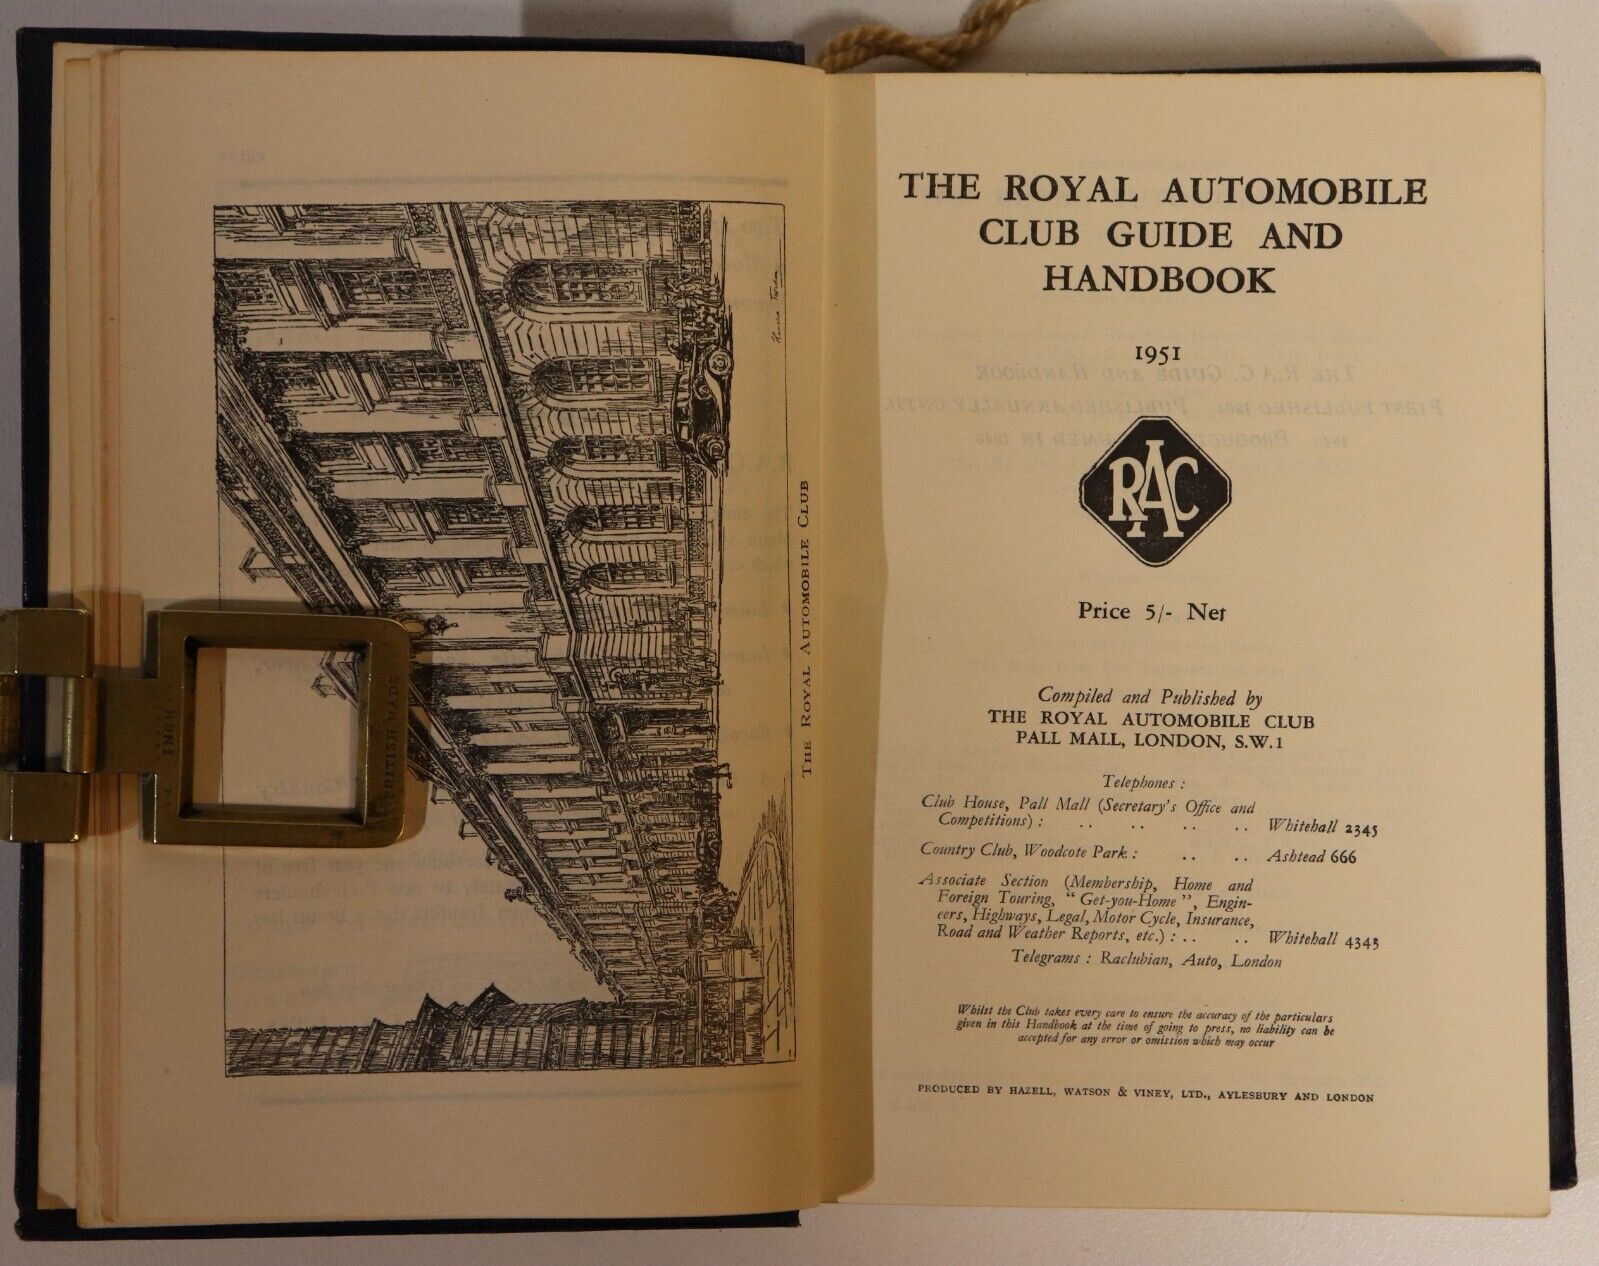 Royal Automobile Club Guide For 1951 - Vintage Motor Travel Guide Book - 0